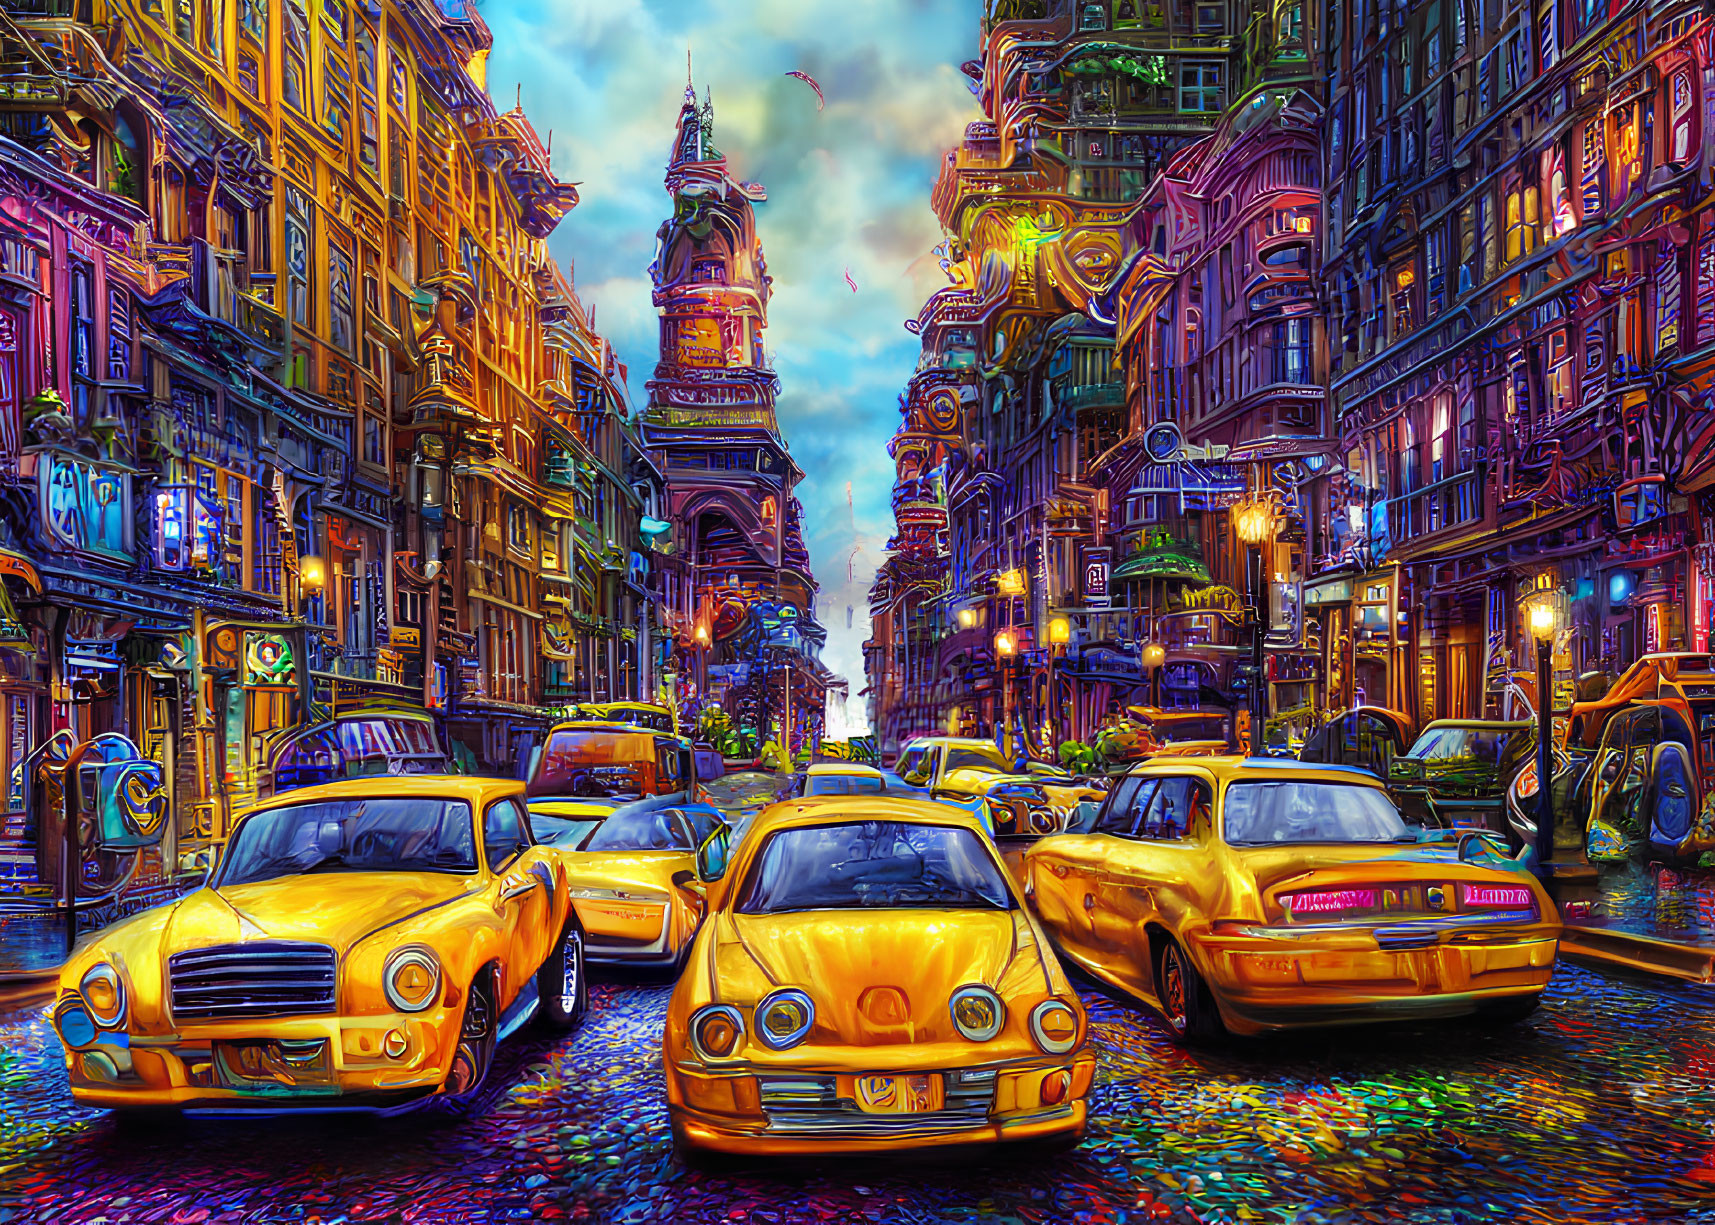 Colorful city street scene with yellow taxis under twilight sky